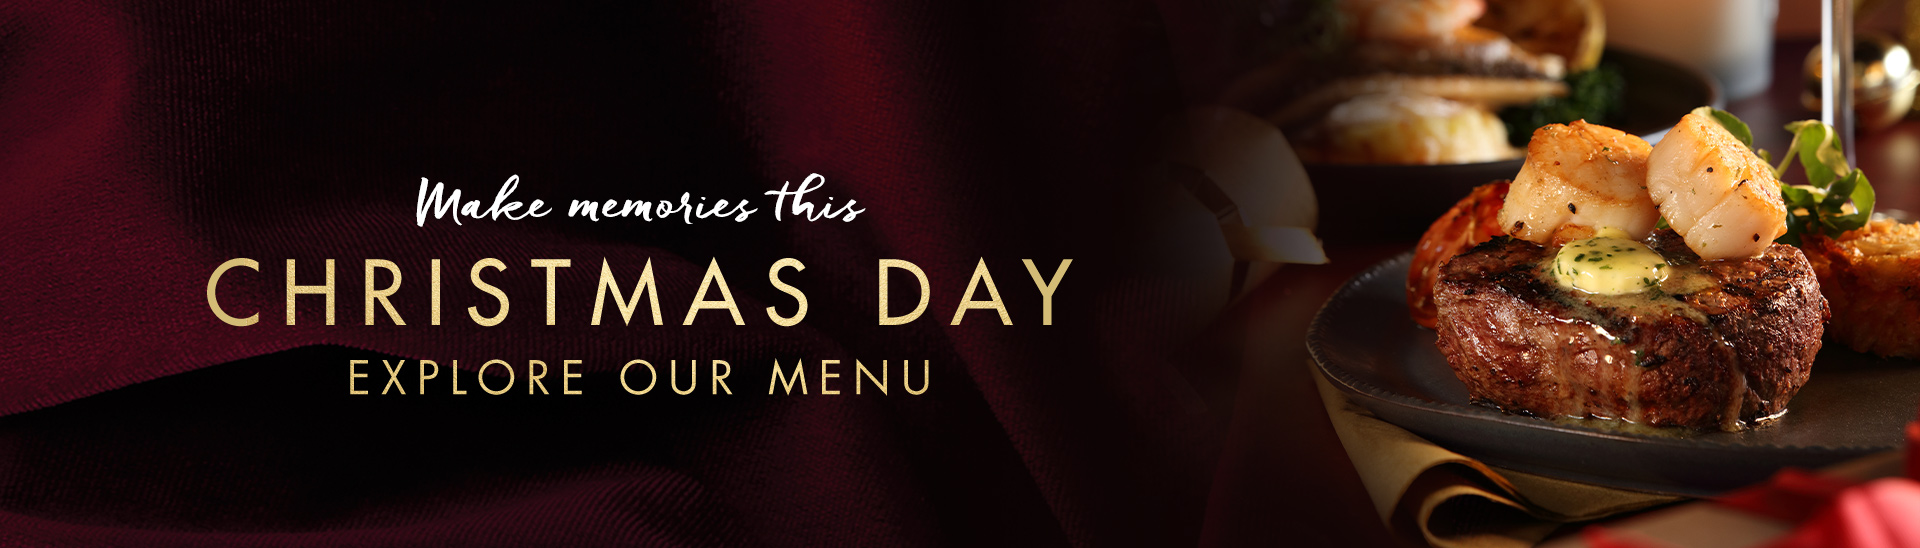 Christmas Day menu at Miller & Carter Grimsby